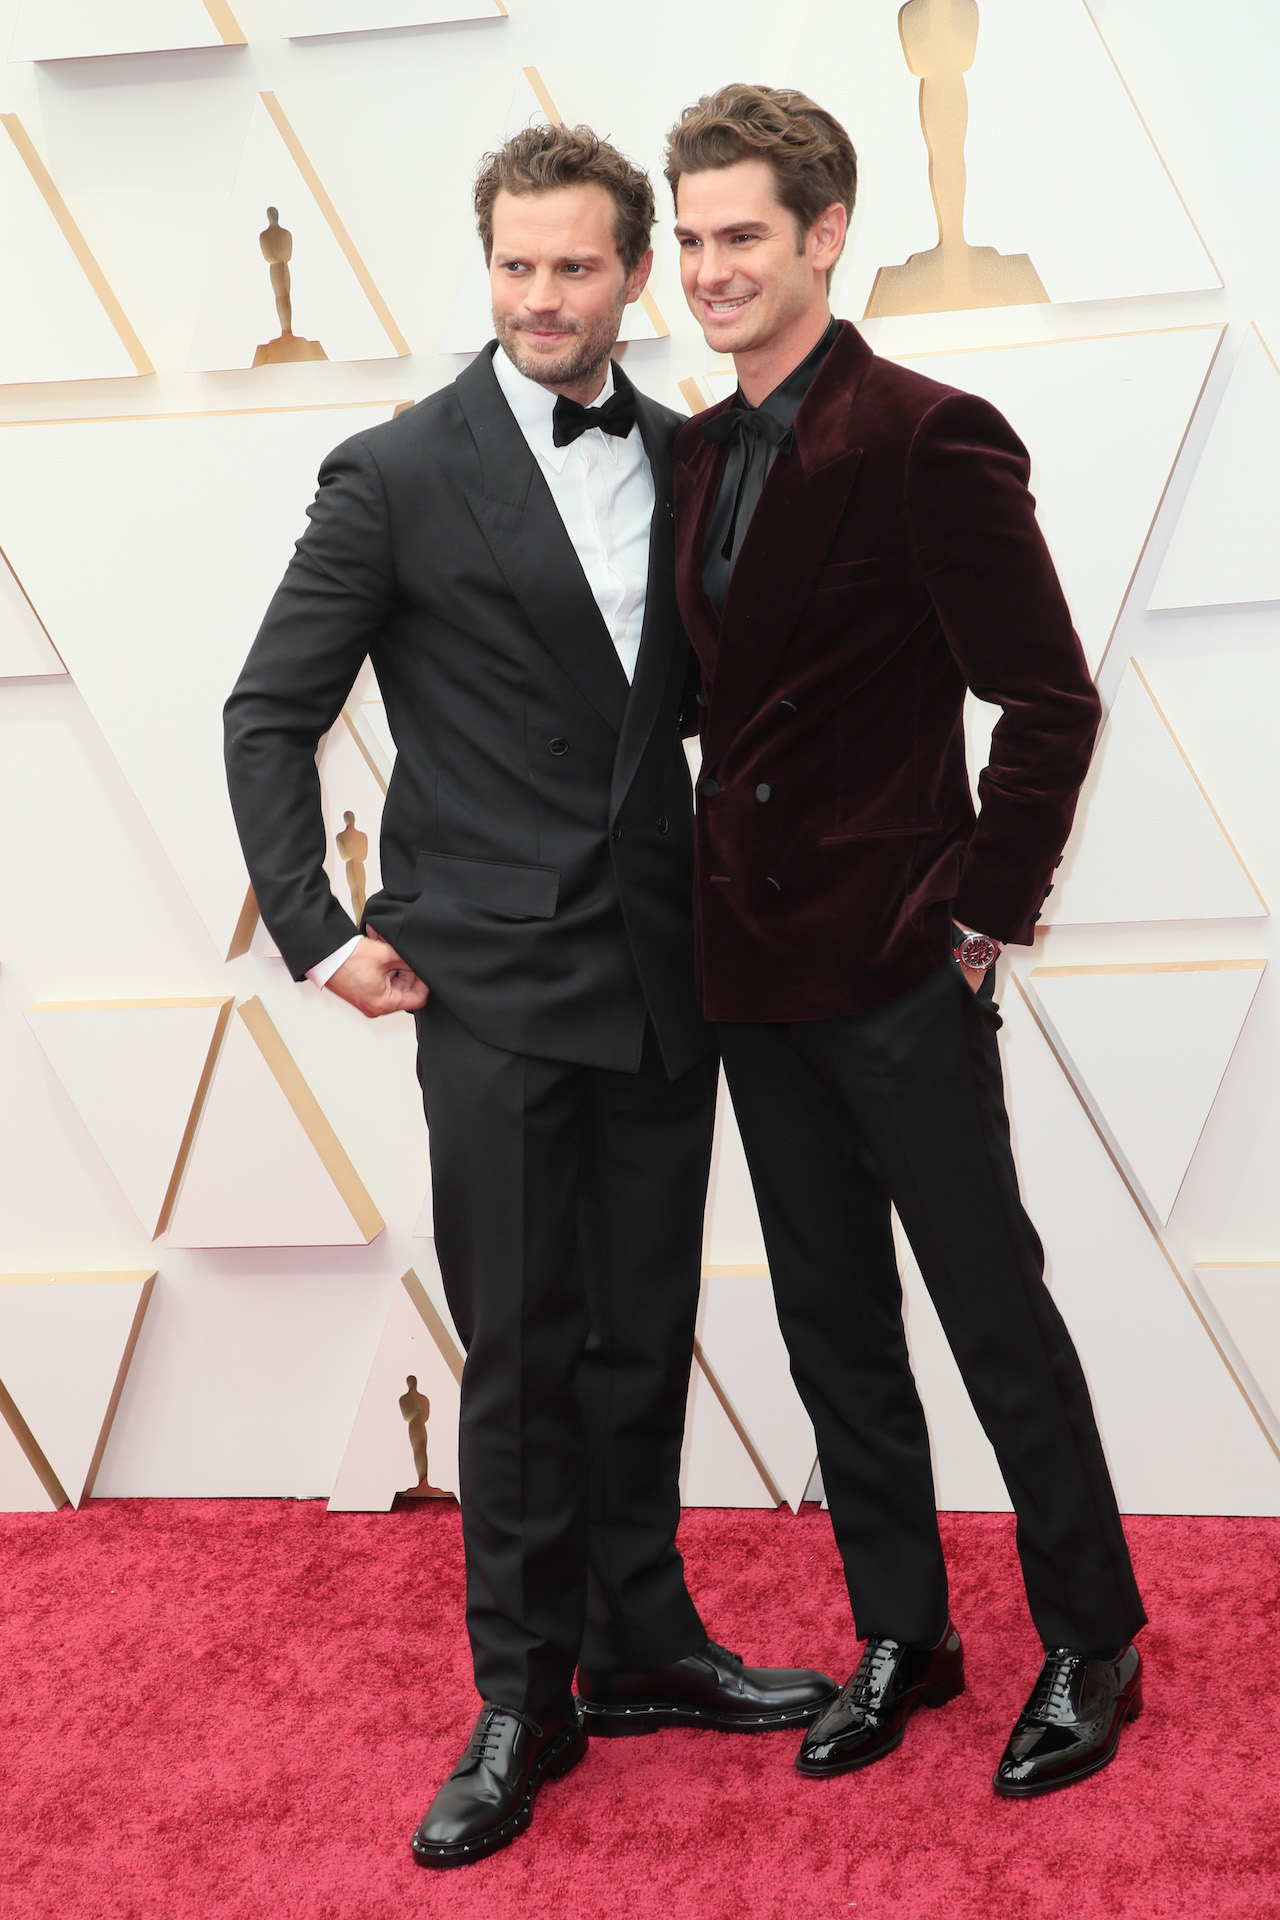 Jamie Dornan and Andrew Garfield posing on Oscars 2022 red carpet together